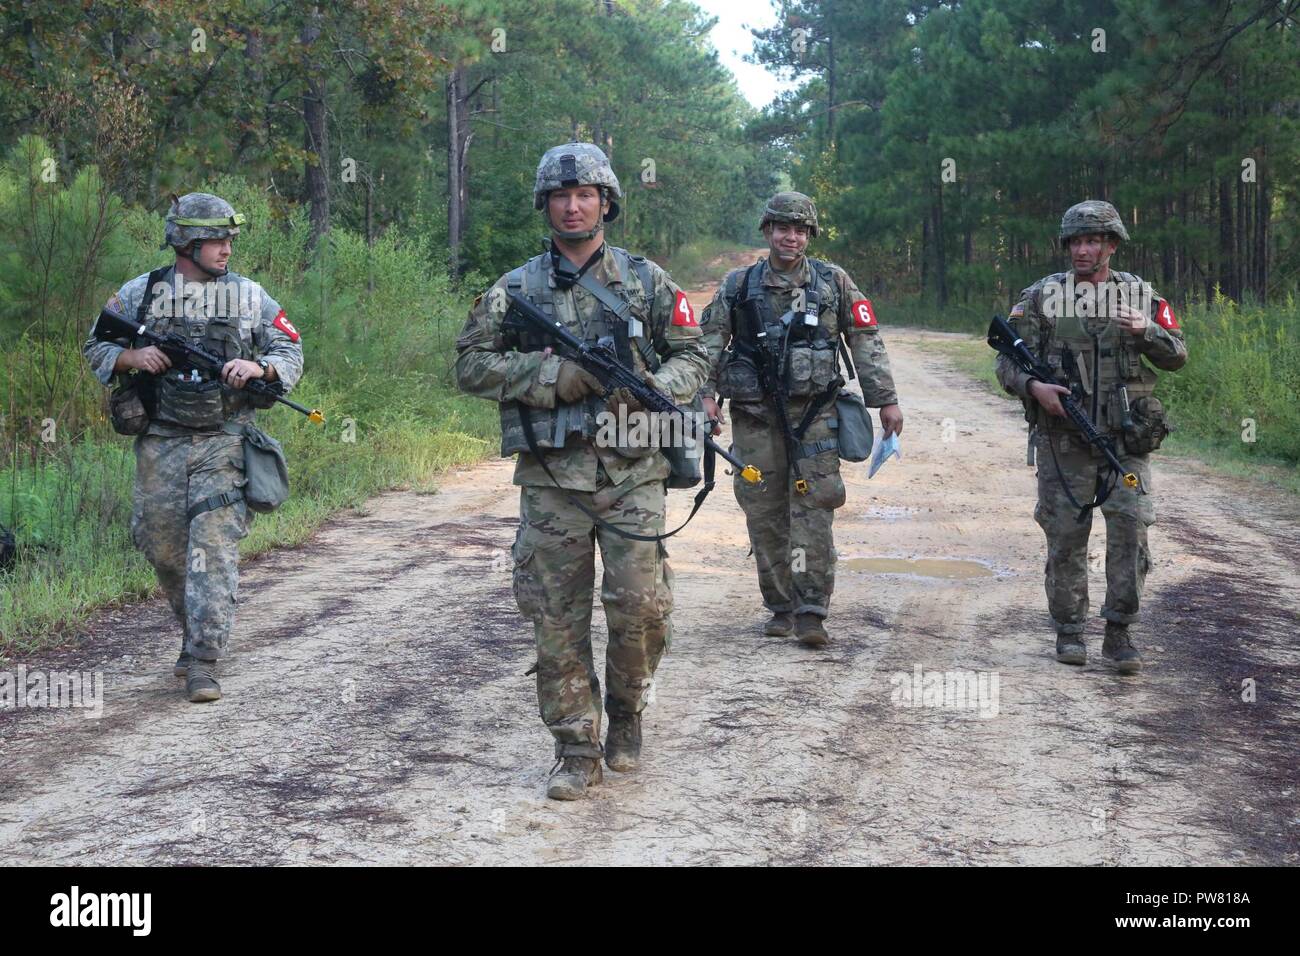 U.S. Soldiers, competing in the 2017 Best Medic Competition, walk together to the finish line after completing the Army Warrior Training at Fort Bragg, N.C., Sept. 19, 2017. The competition tested the physical and mental toughness, as well as the technical competence, of each medic to identify the team moving forward to represent the region at the next level of the competition. Stock Photo